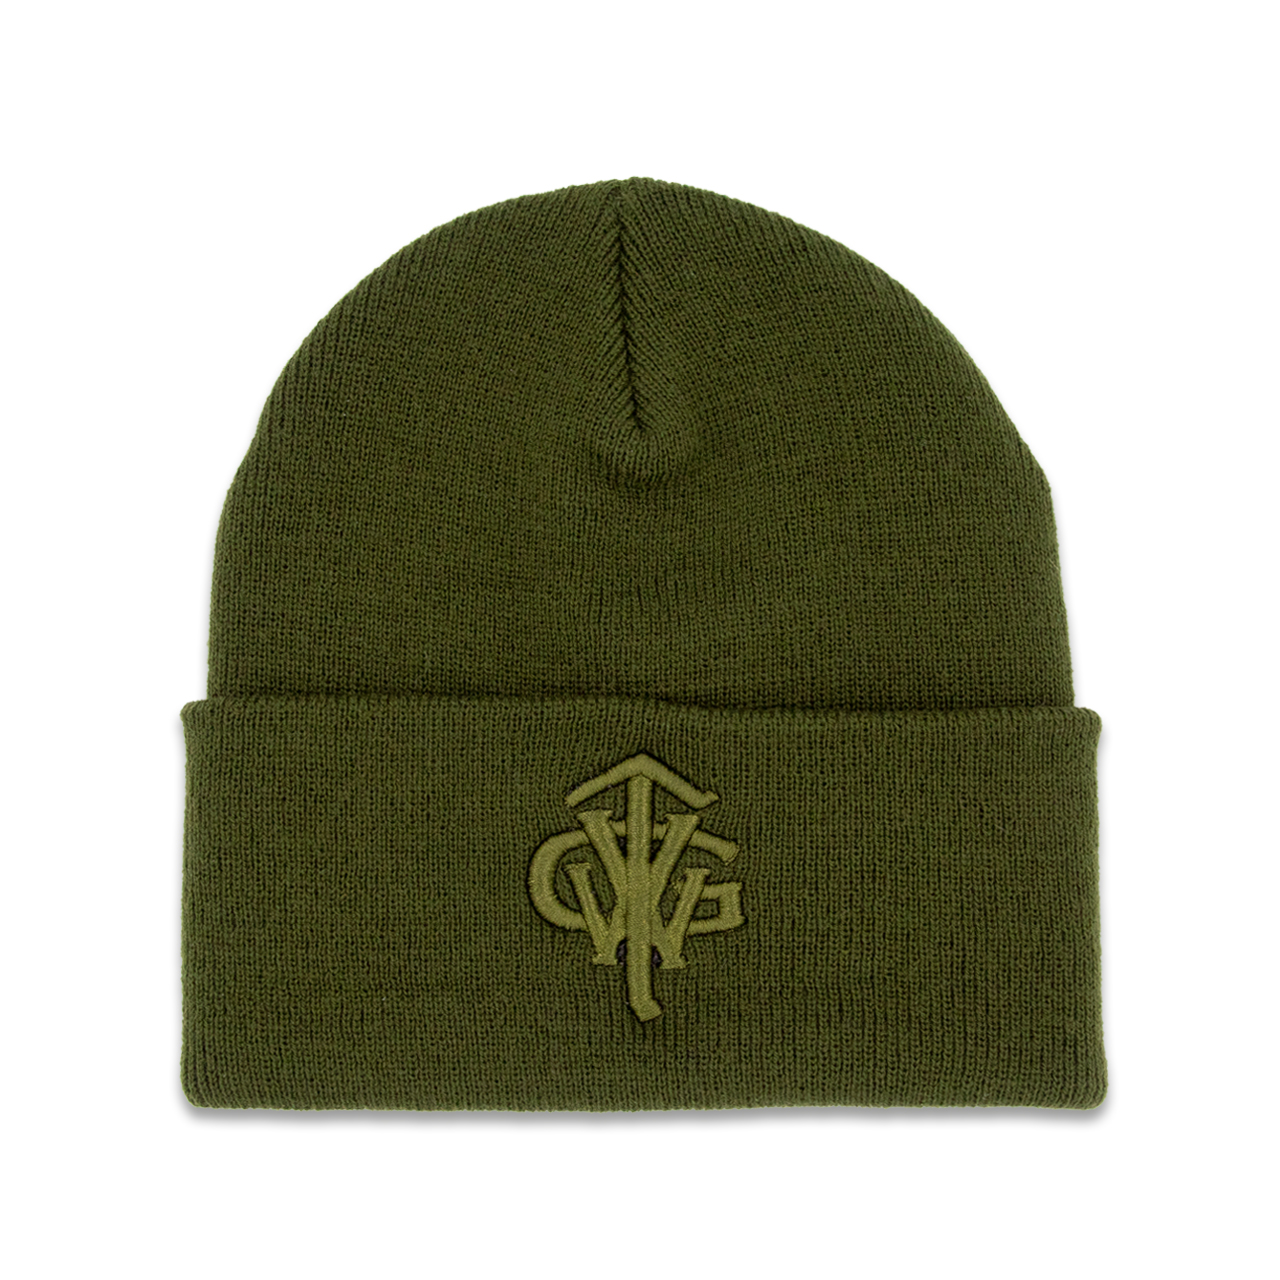 Classic Long Beanie „TVWG COLLEGE“, oliv